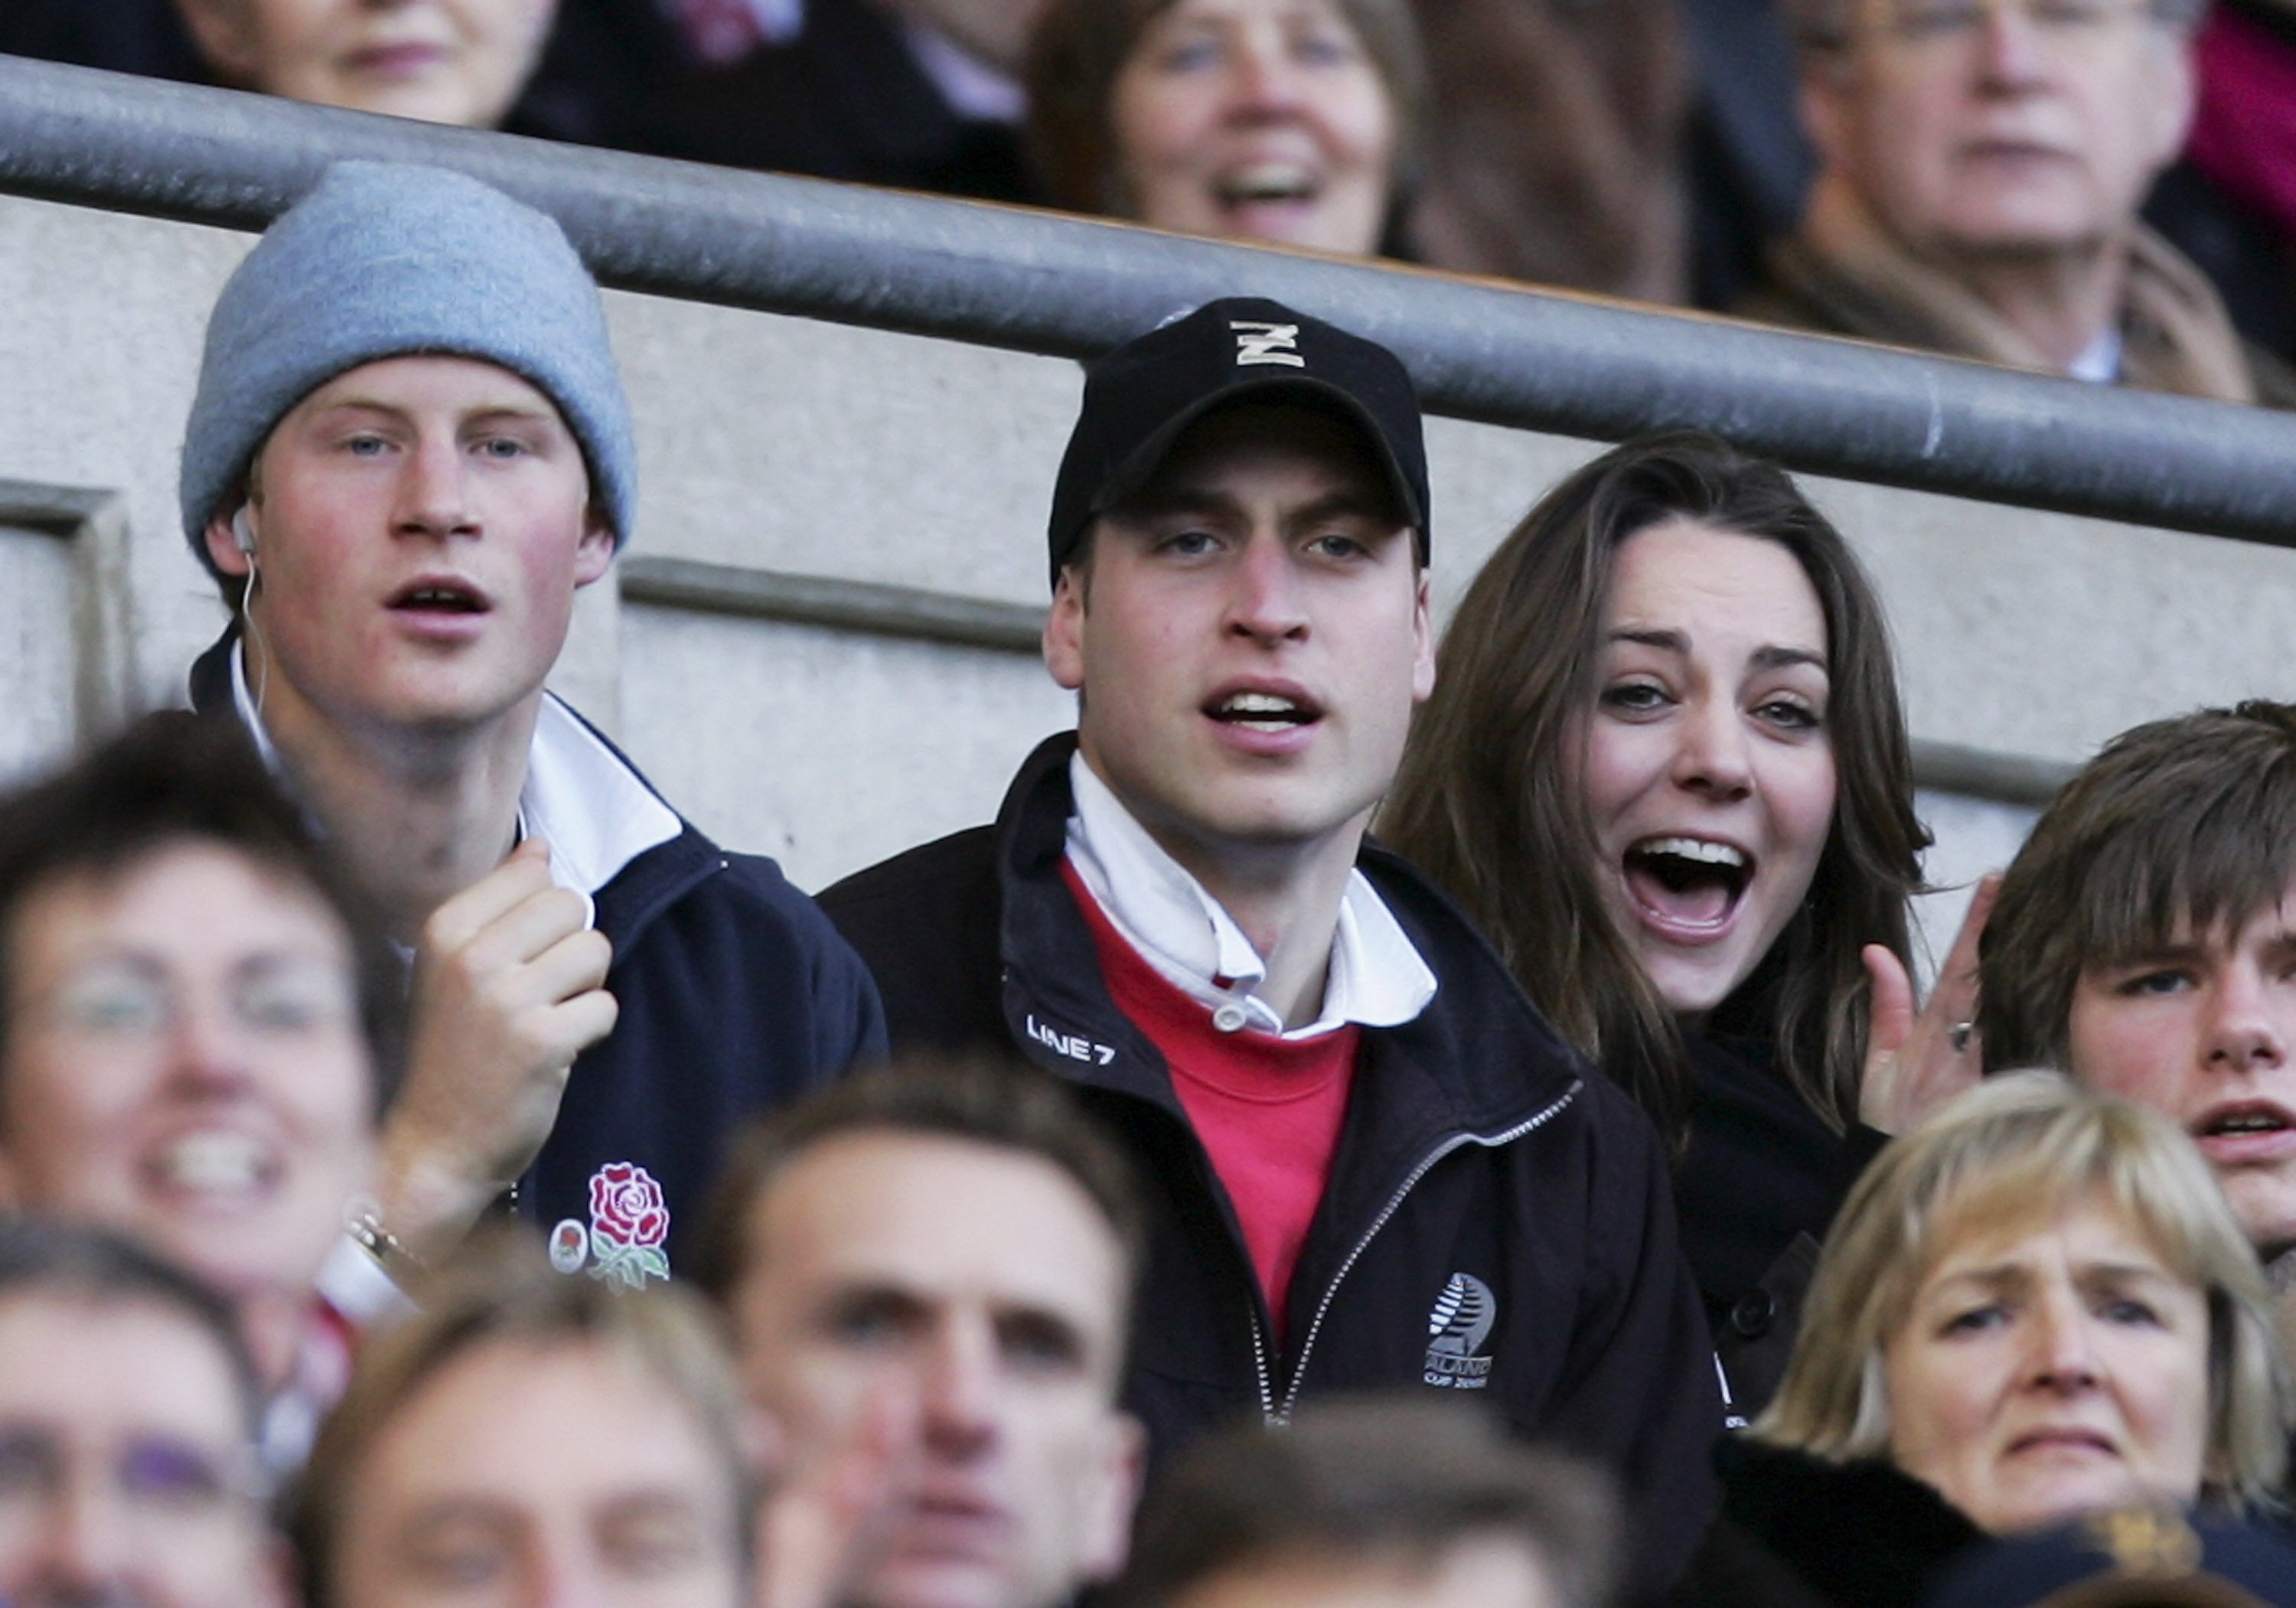 Prince Harry, Prince William, and Kate Middleton during the RBS Six Nations Championship on February 10, 2007, in London, England. | Source: Getty Images